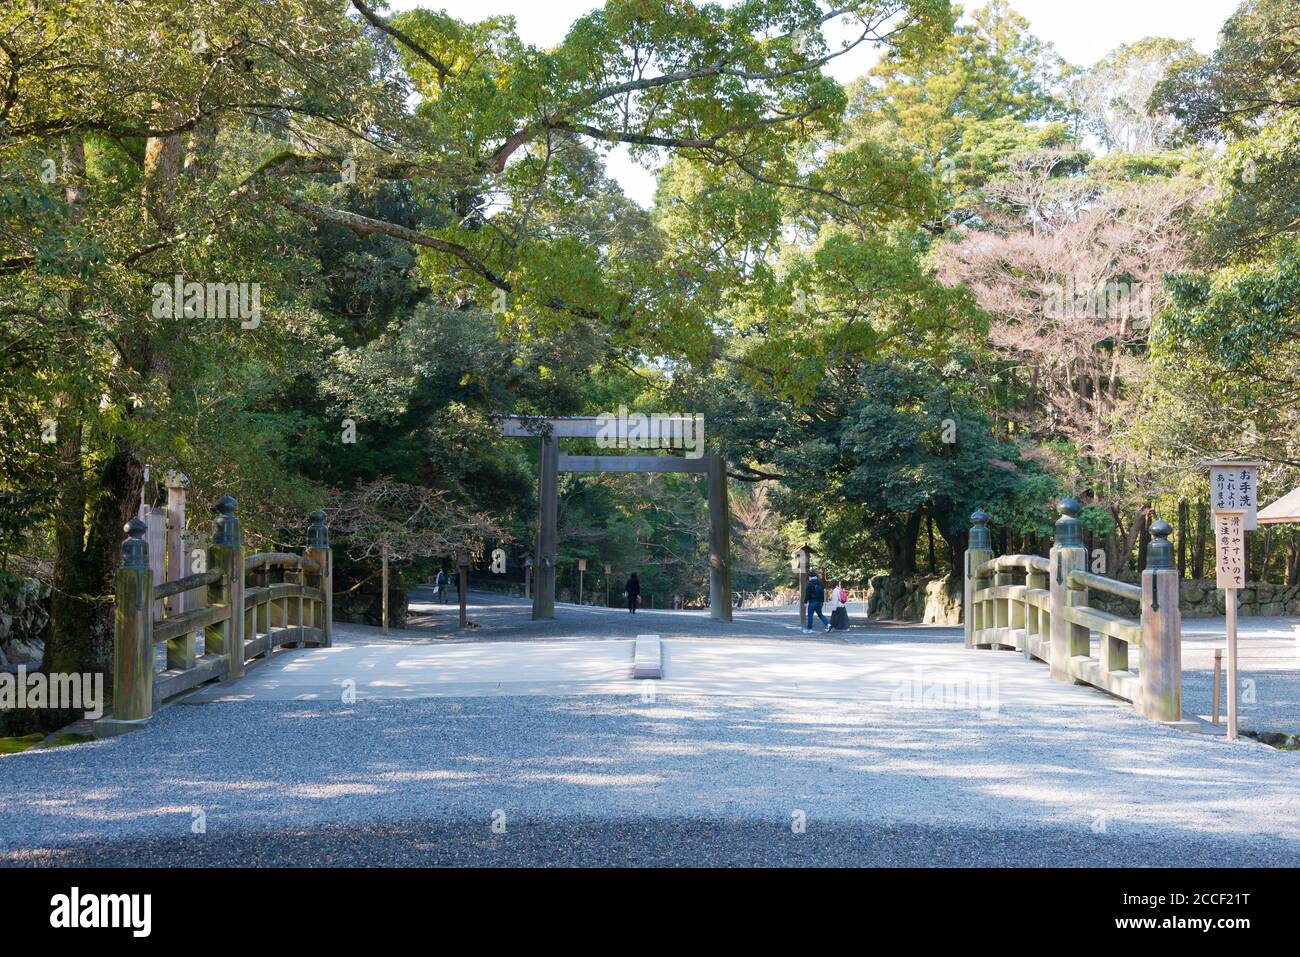 Mie, Japan - Approach at Ise Grand Shrine (Ise Jingu Naiku - inner shrine) in Ise, Mie, Japan. The Shrine was a history of over 1500 years. Stock Photo